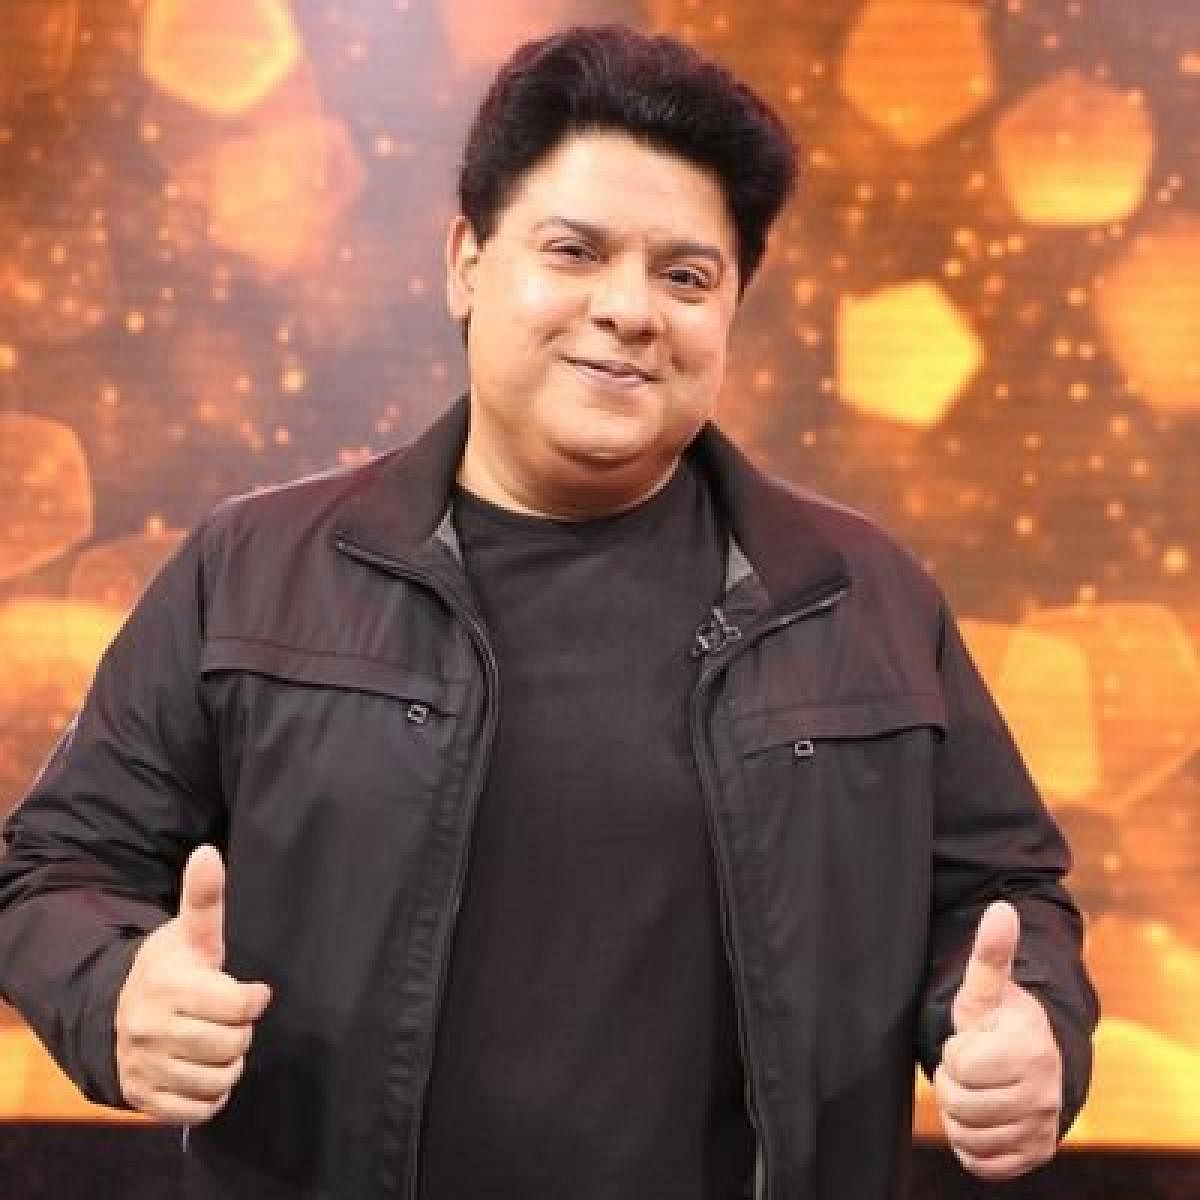 Director Sajid Khan was accused of sexual harassment by four women.